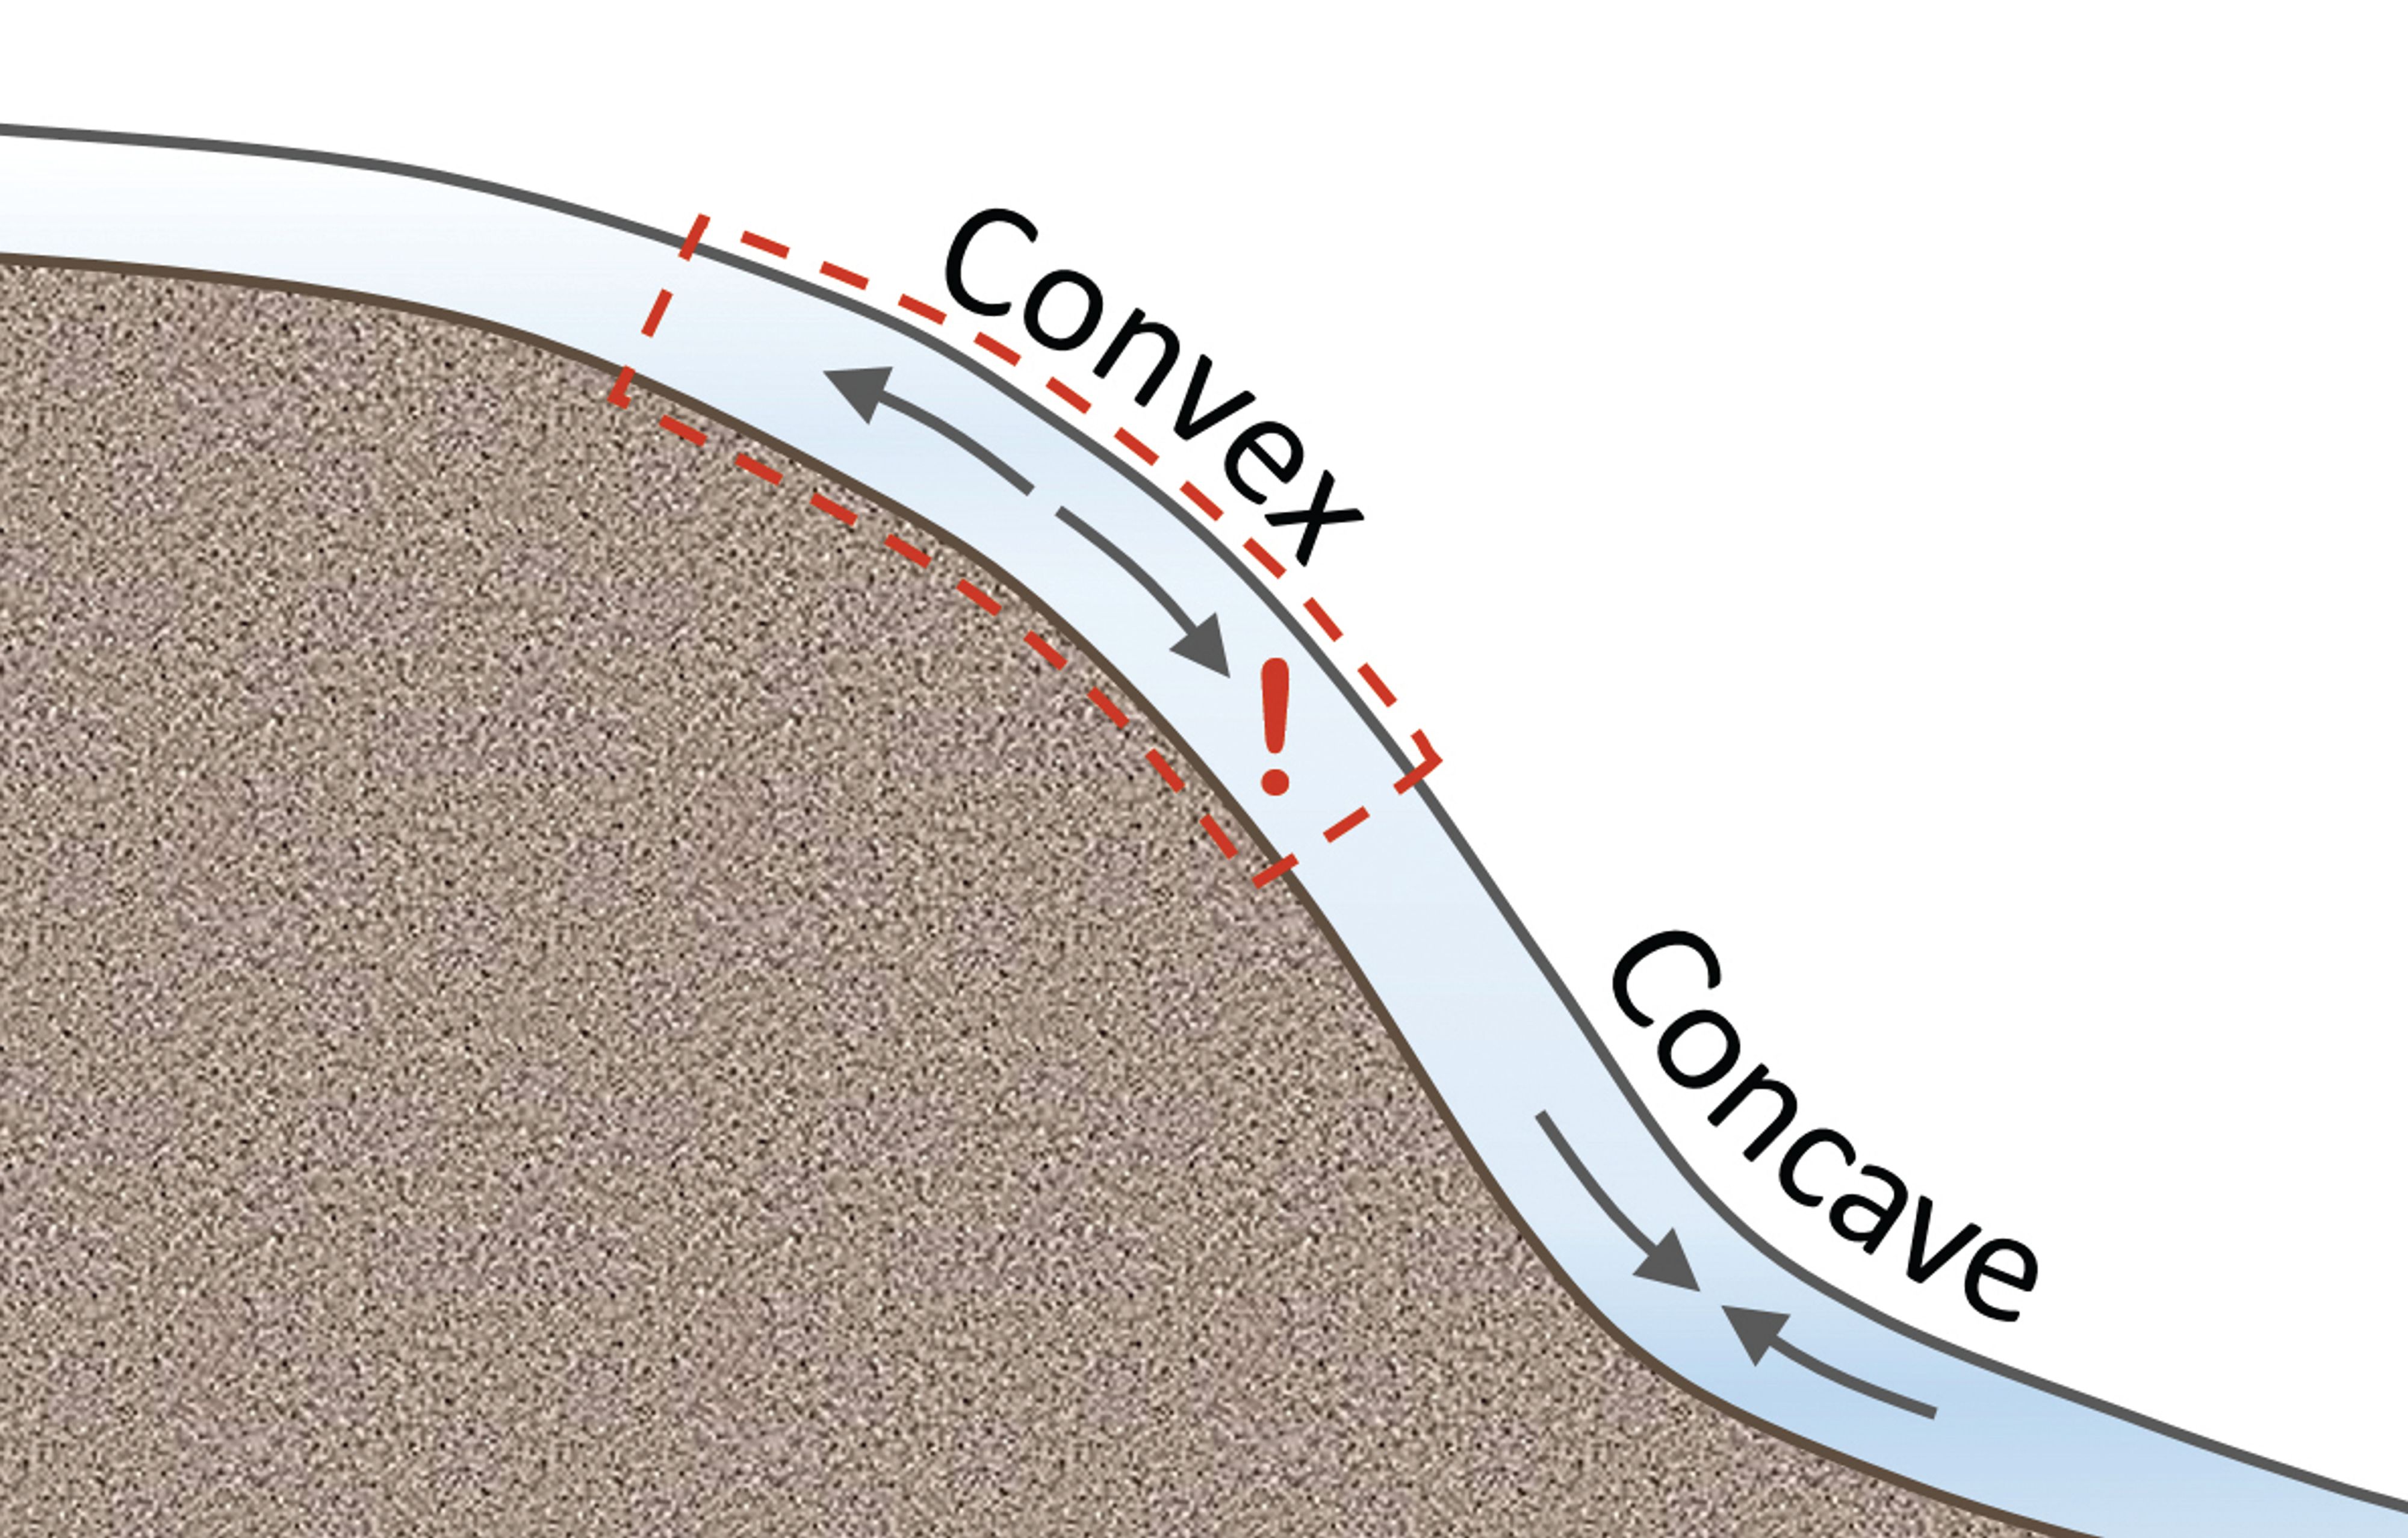 Convex slopes are more likely to be trigger points. Concave sections of small slopes can sometimes support the steeper section above.